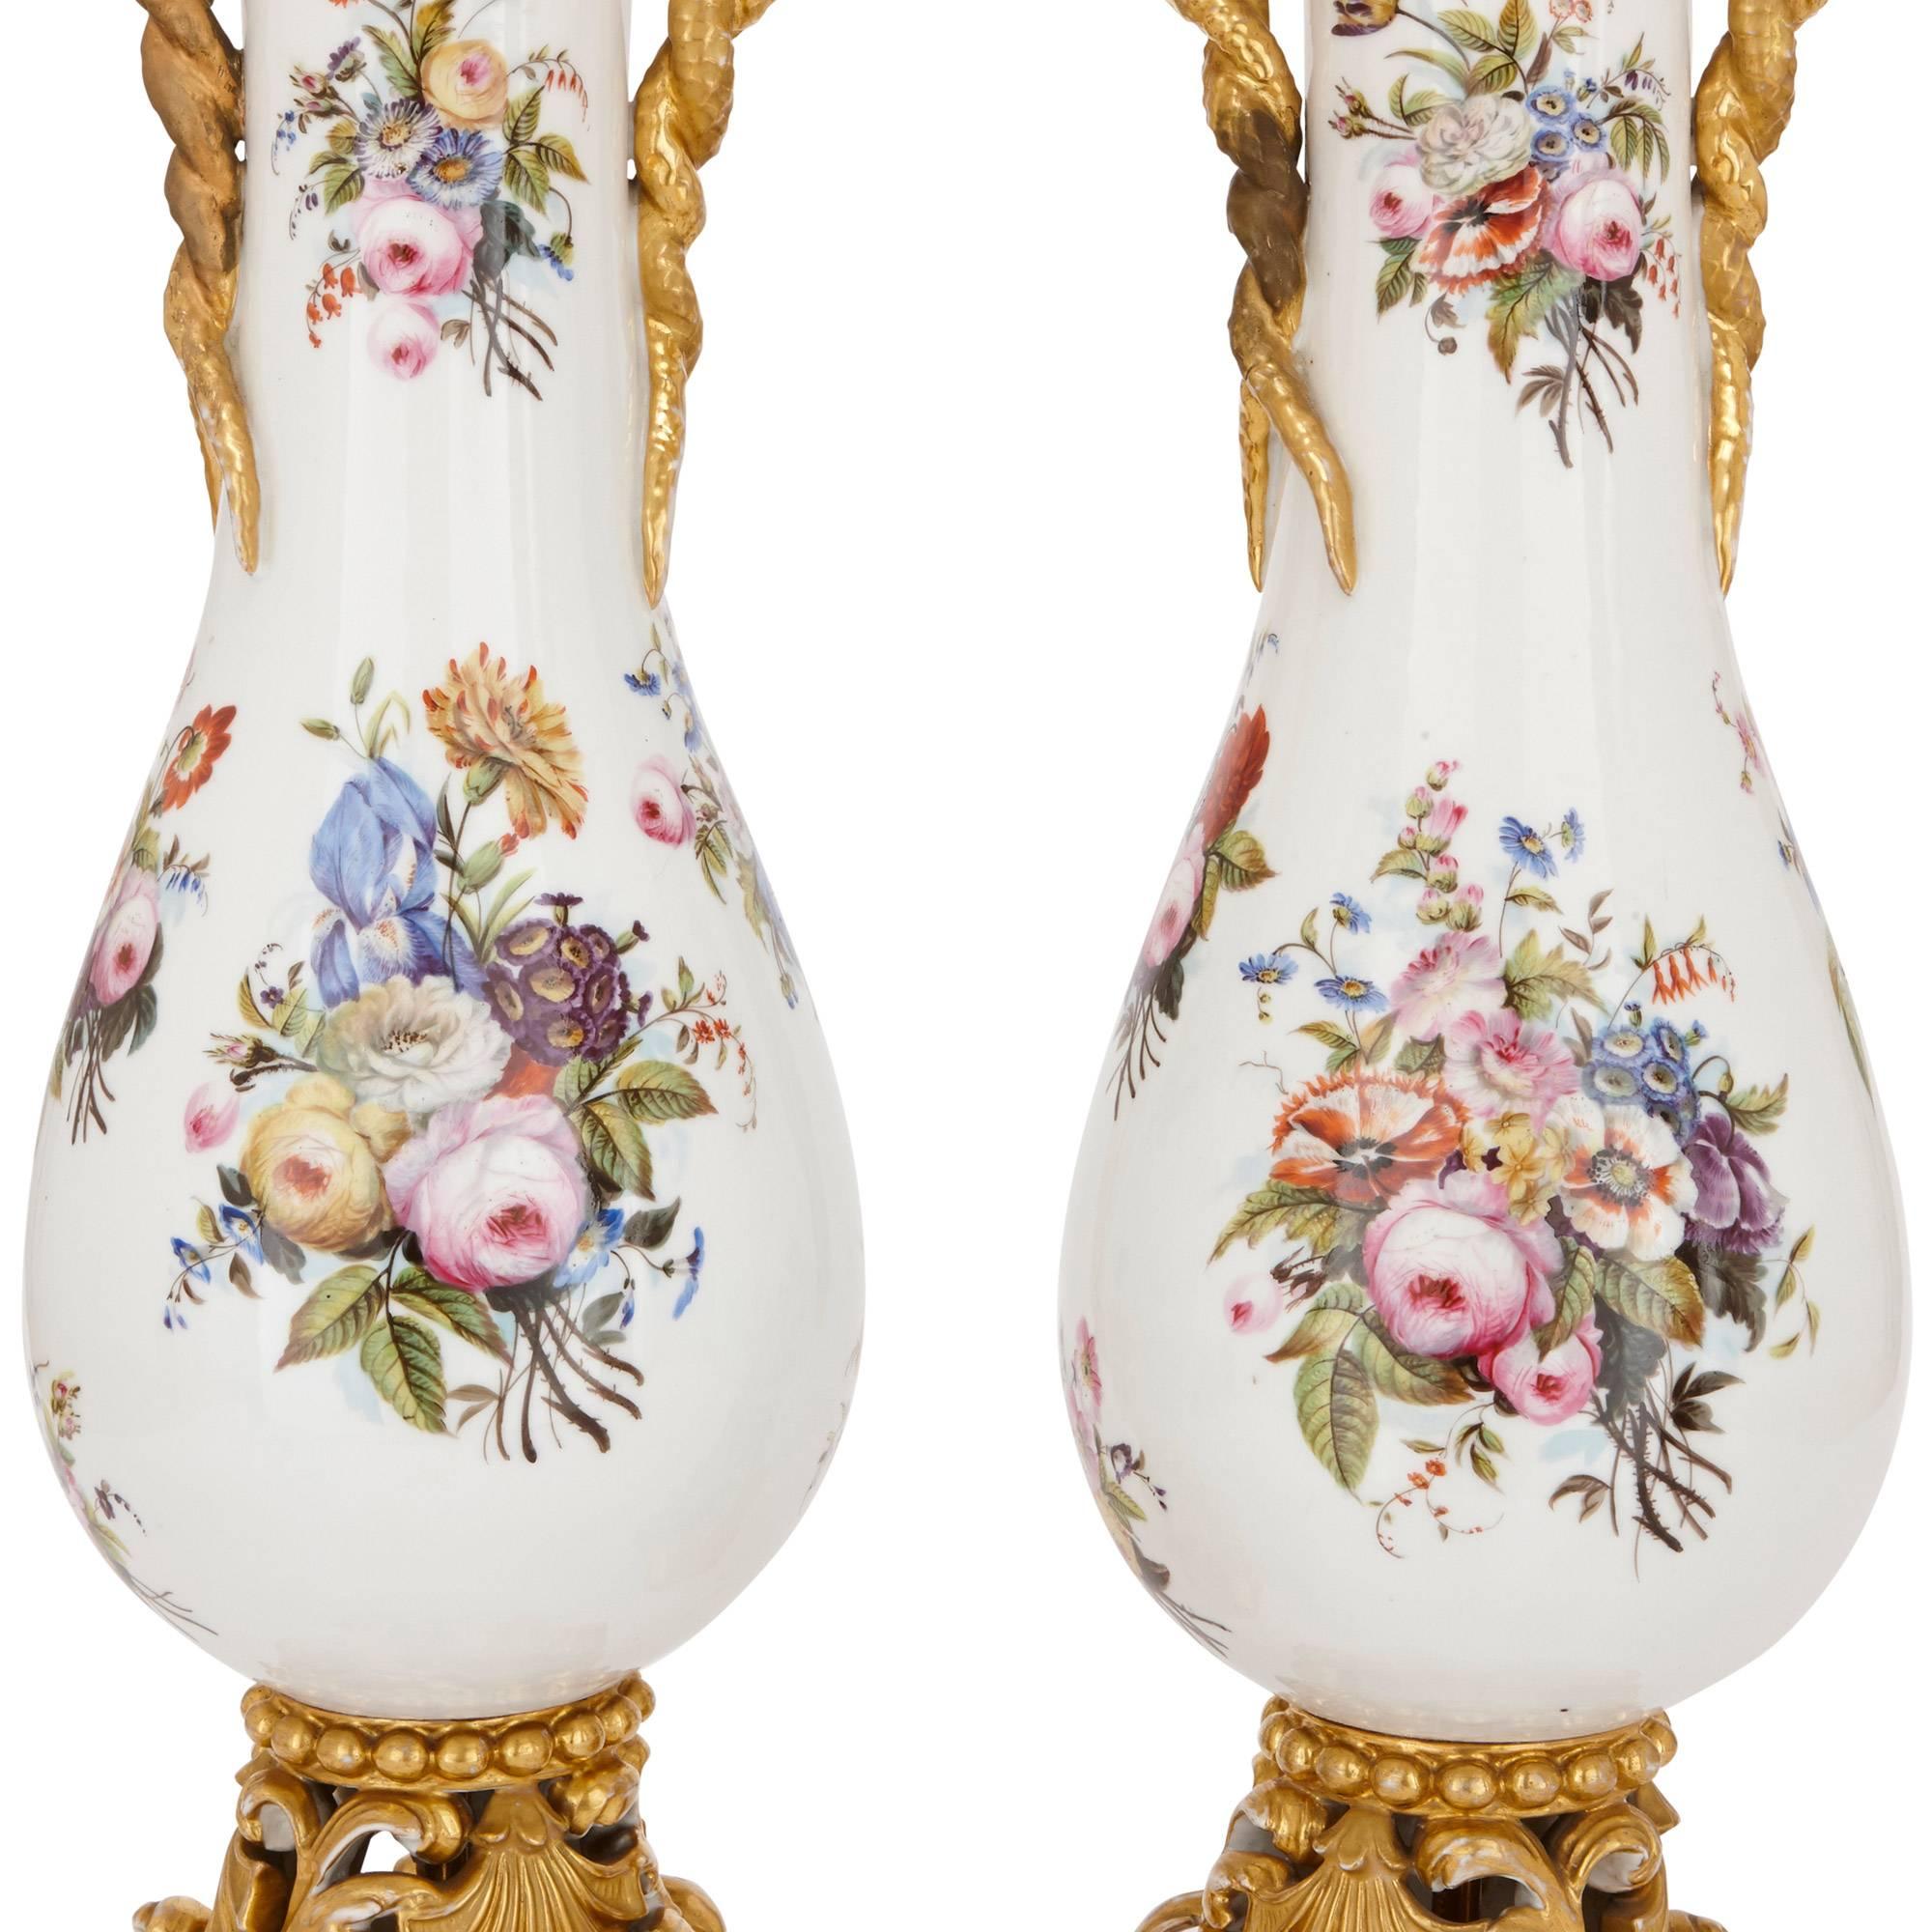 Rococo Pair of Floral Porcelain Vases in the Style of Jacob Petit